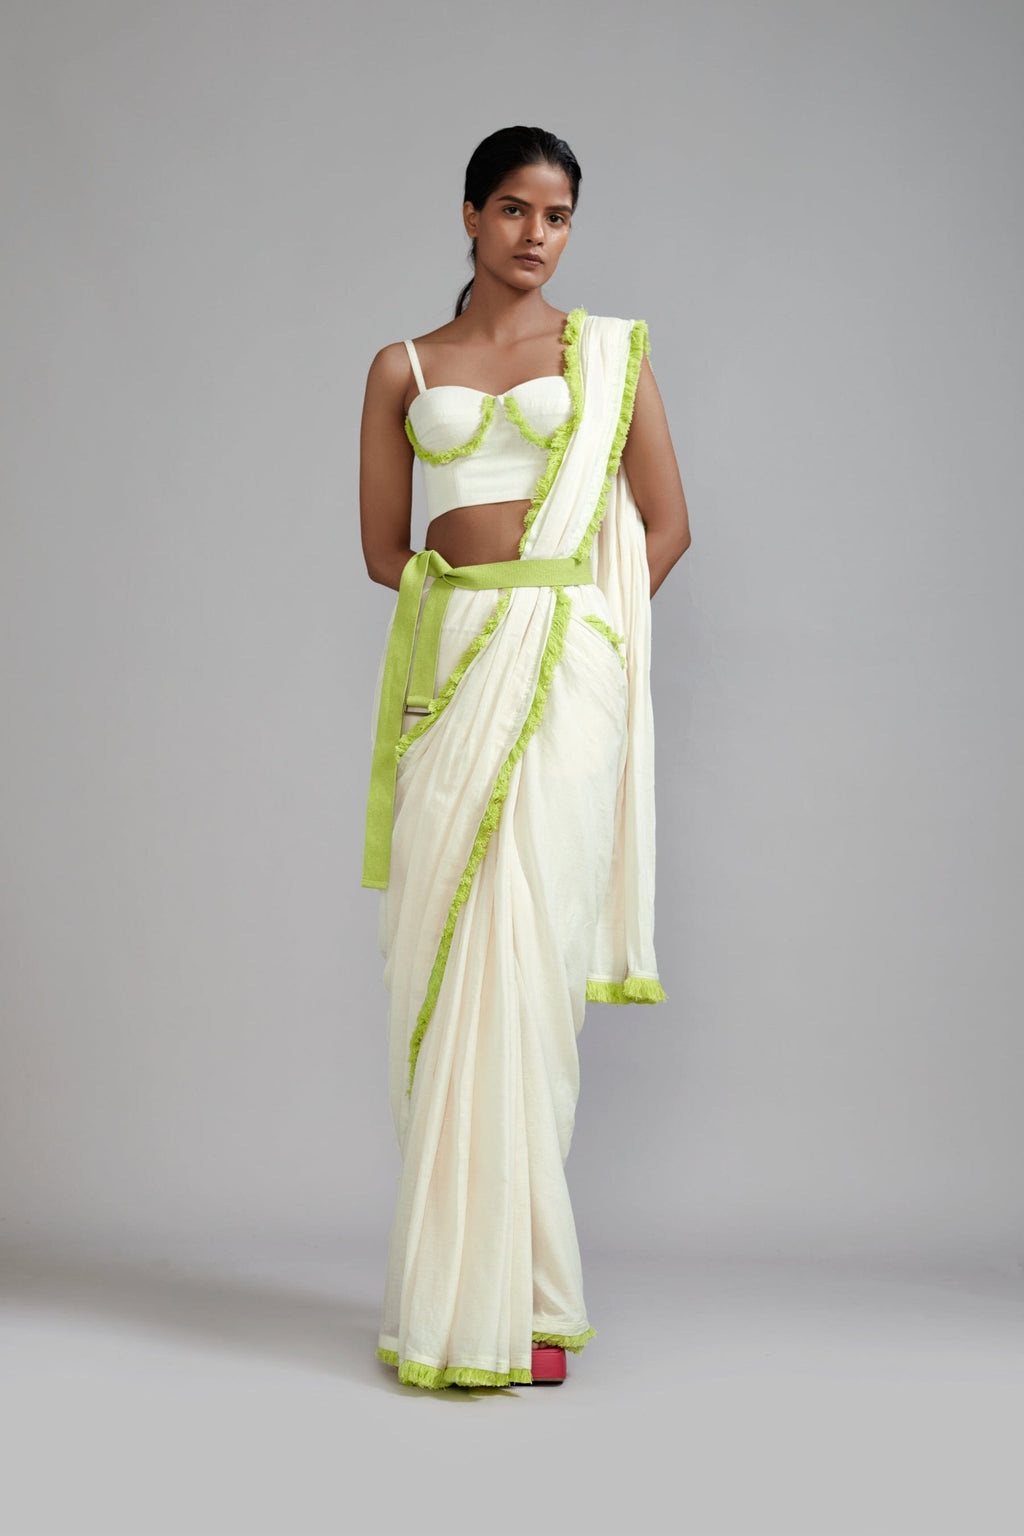 Mati Separates XS Off-White with Neon Green Fringed Corset